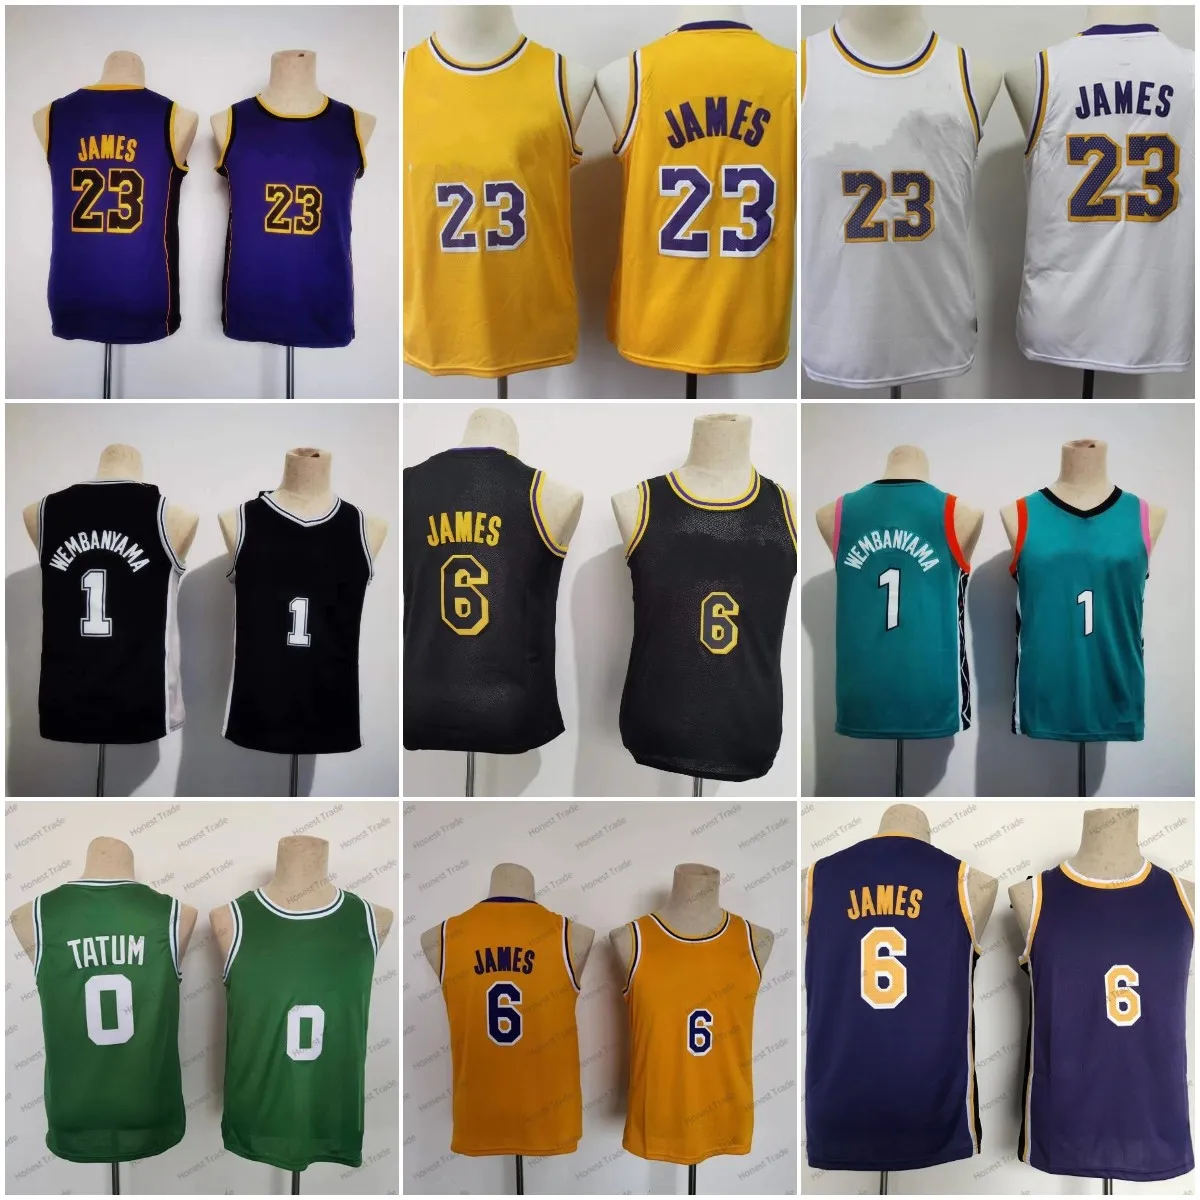 Men Kids Youth James 30 Curry Basketball Jersey Giannis Larry Bird Vince Carter Iverson Durant Victor Wembanyama Stitched Youth Basketball Jerseys Retro 0 33 3 15 6 23